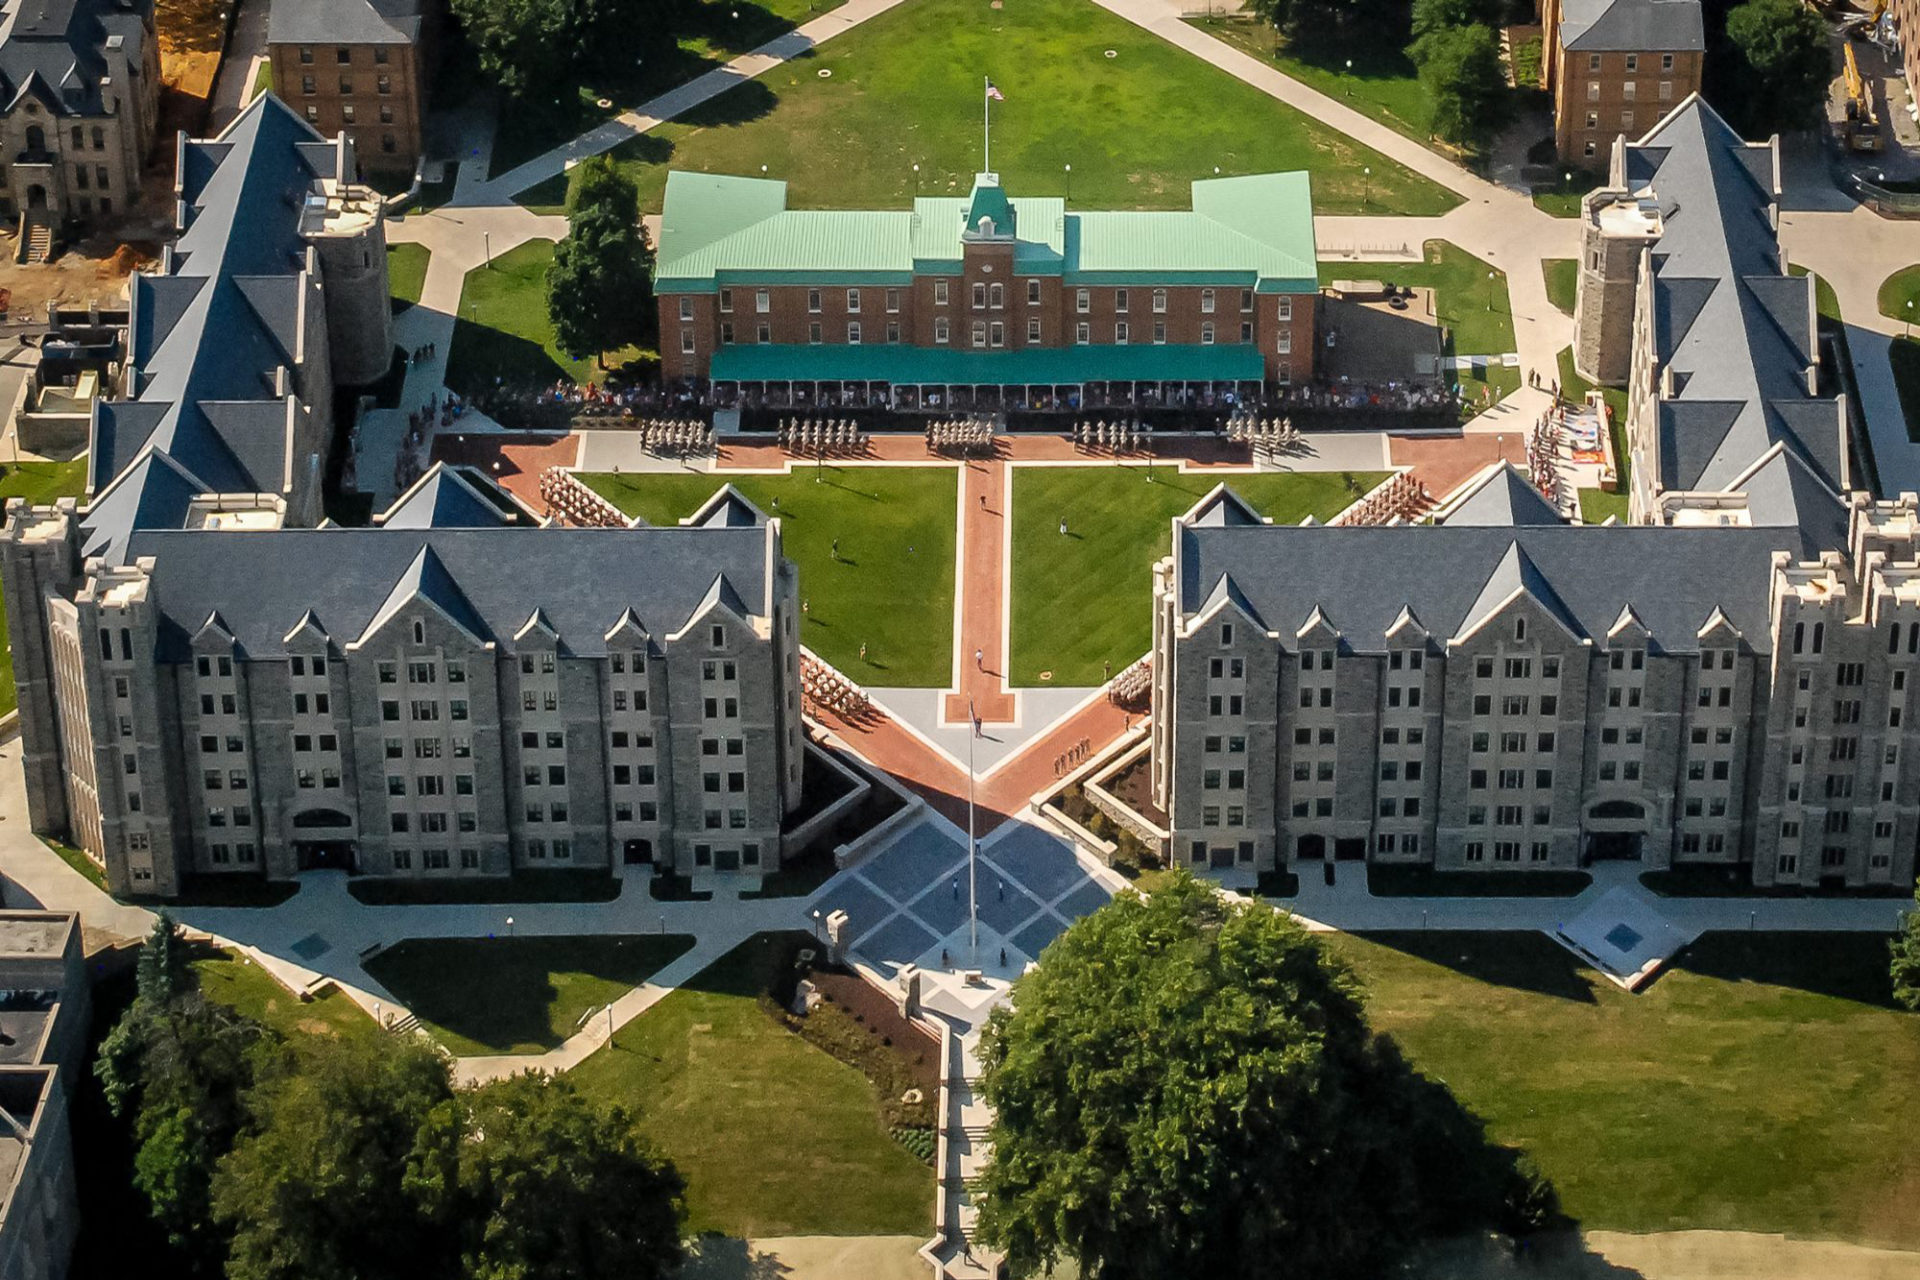 Aerial view of Pearson Hall and New Cadet Hall at Virginia Tech in Blacksburg, VA; Architect and engineer: Clark Nexsen